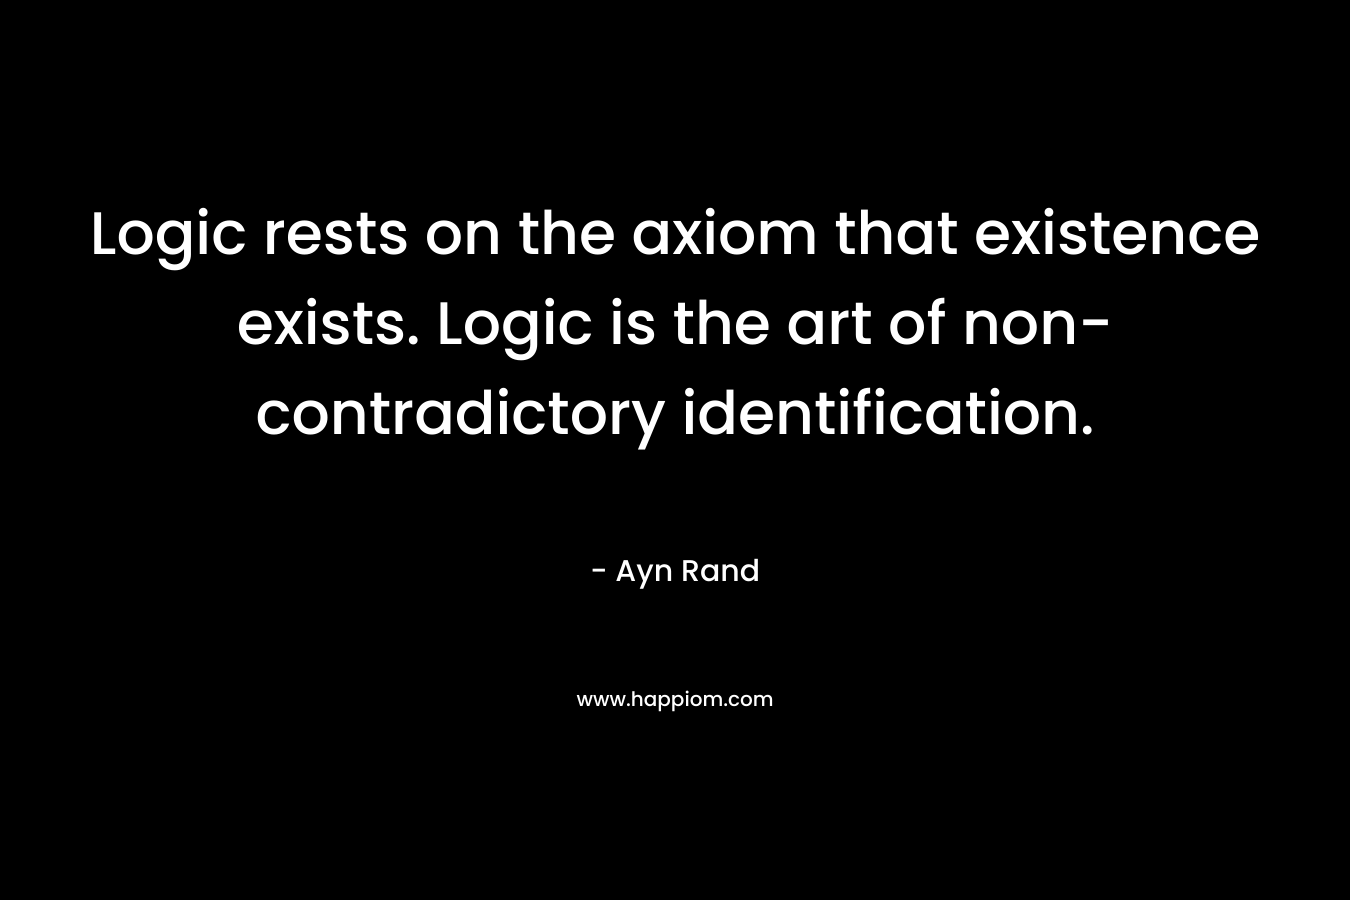 Logic rests on the axiom that existence exists. Logic is the art of non-contradictory identification.